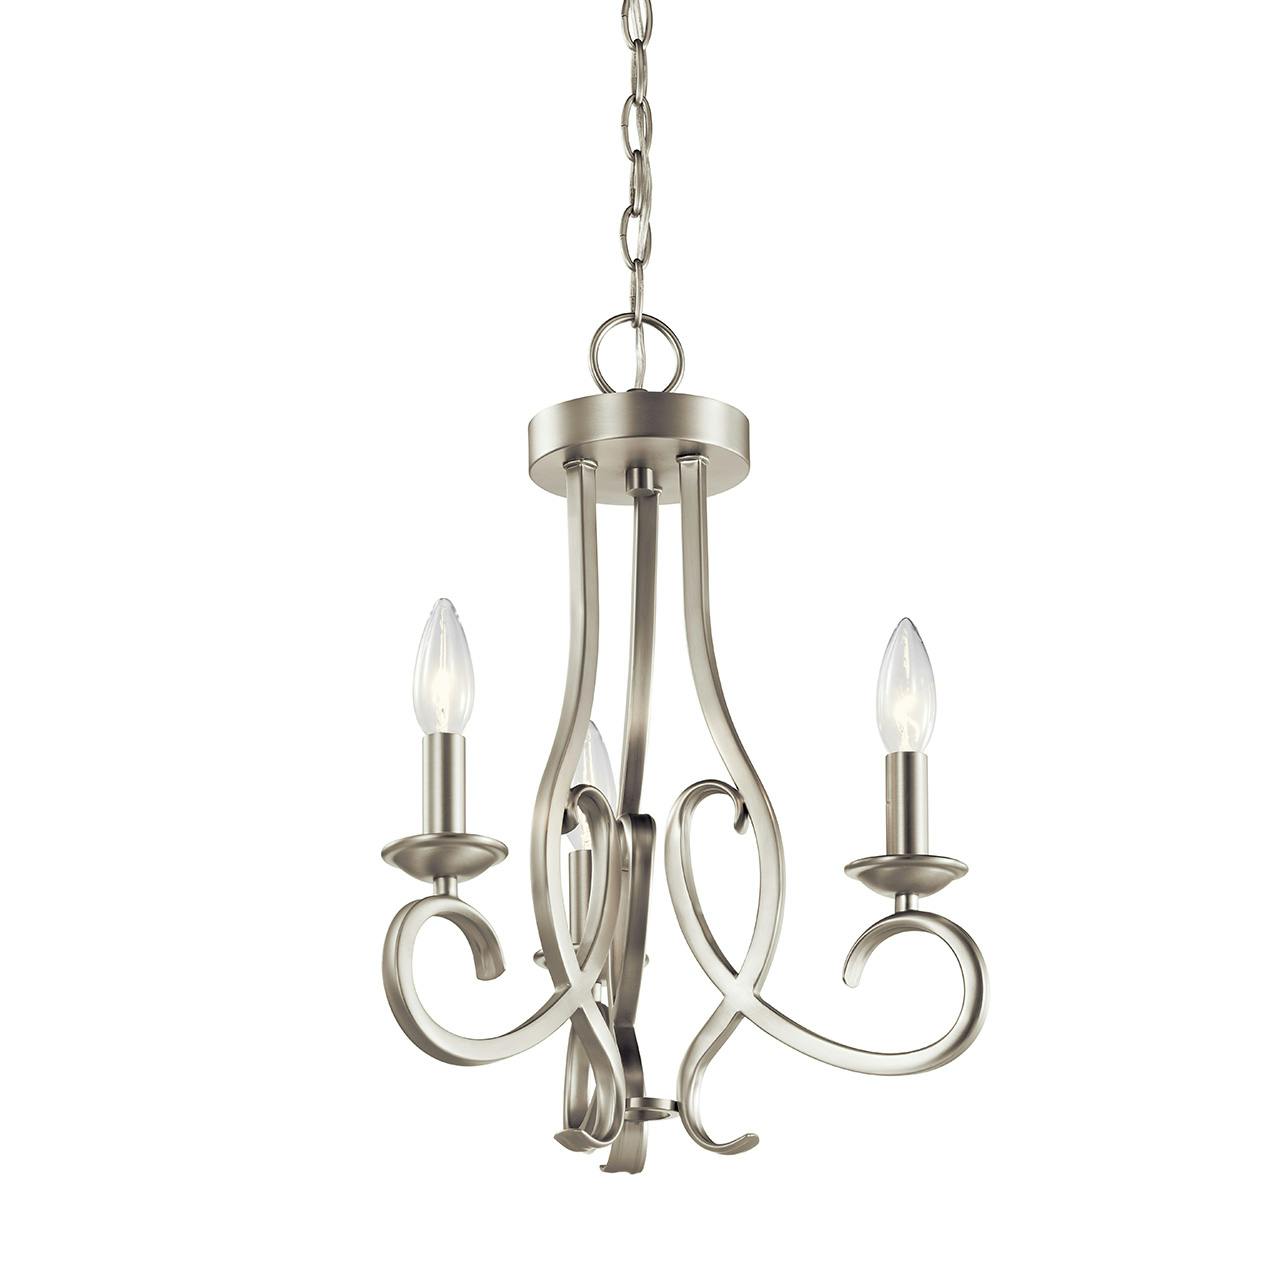 Ania 15" Convertible Chandelier Nickel without the canopy on a white background